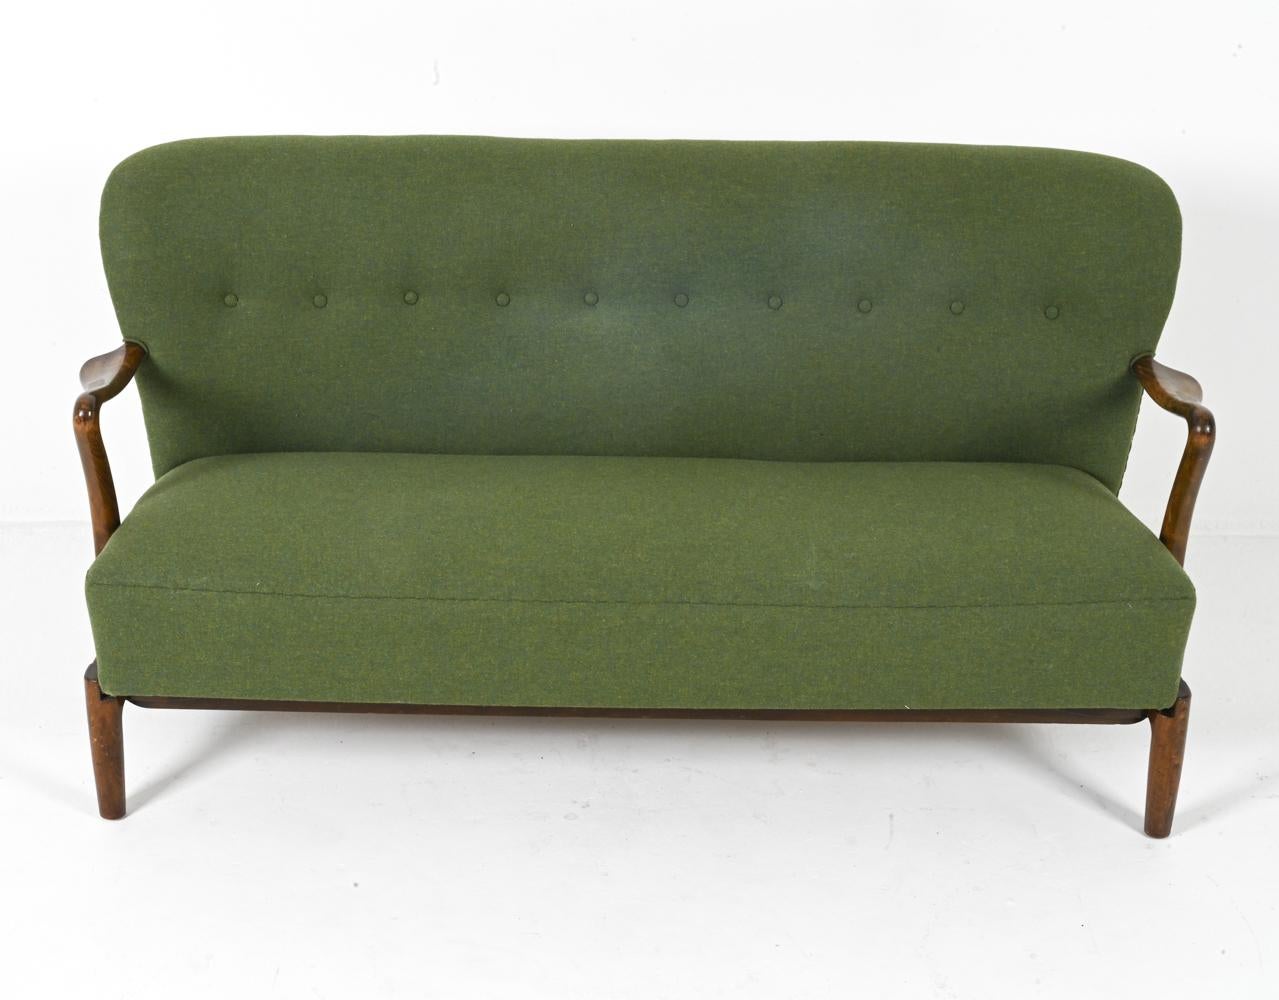 This elegant upholstered beech sofa was crafted by renowned furniture maker Alfred Christensen in the 1950s. This piece embodies the essence of Mid-Century Modernism, seamlessly blending smooth lines, warm beech wood, and inviting green